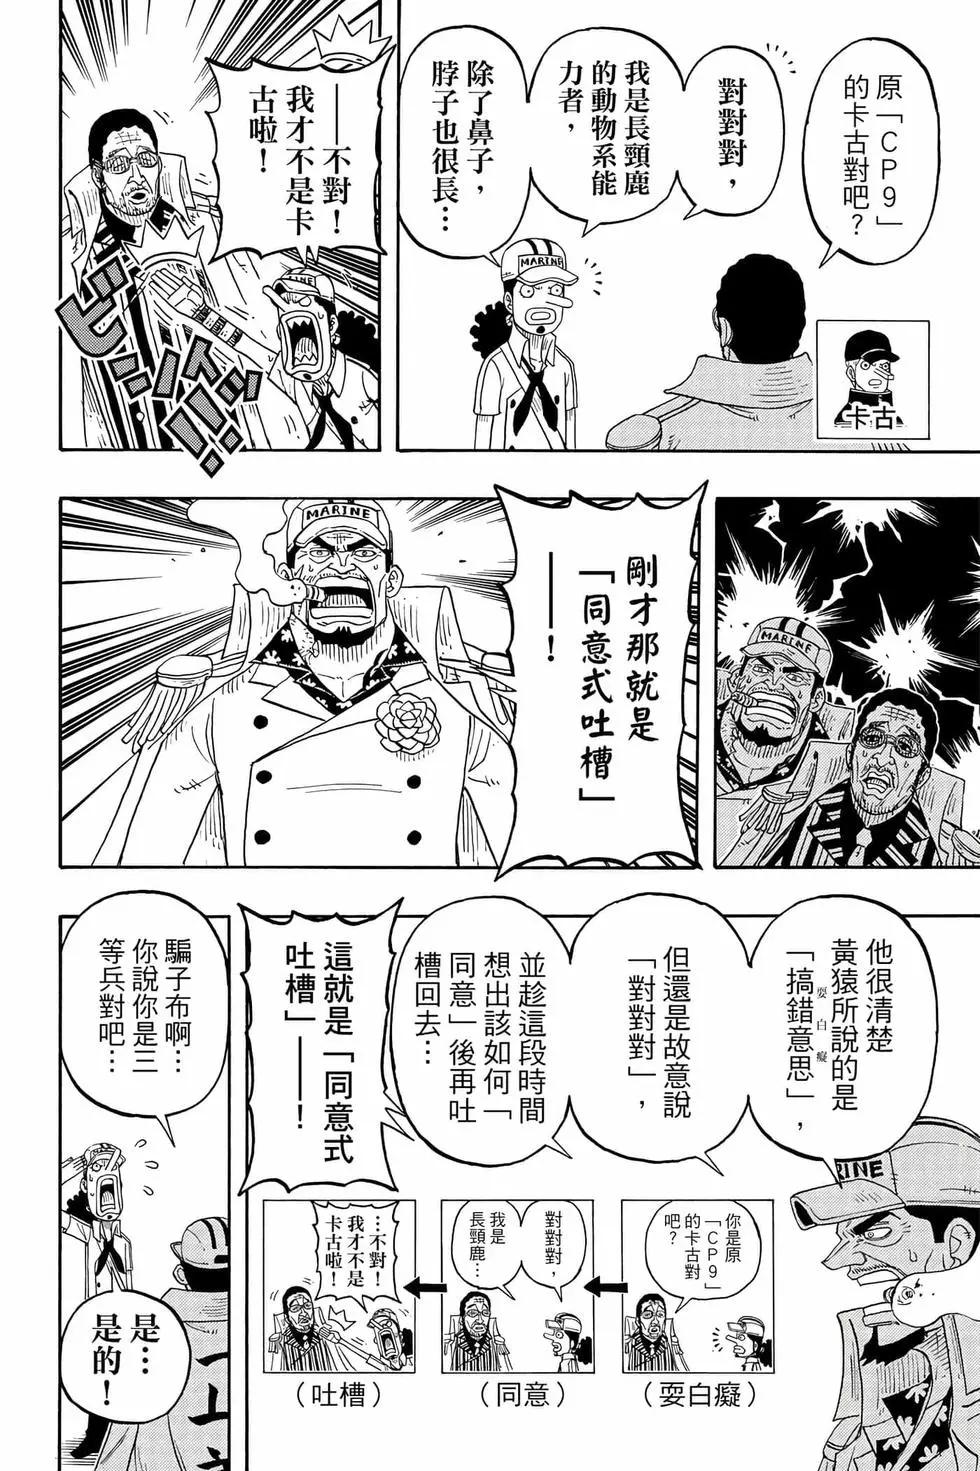 One piece party - 第04卷(1/4) - 5